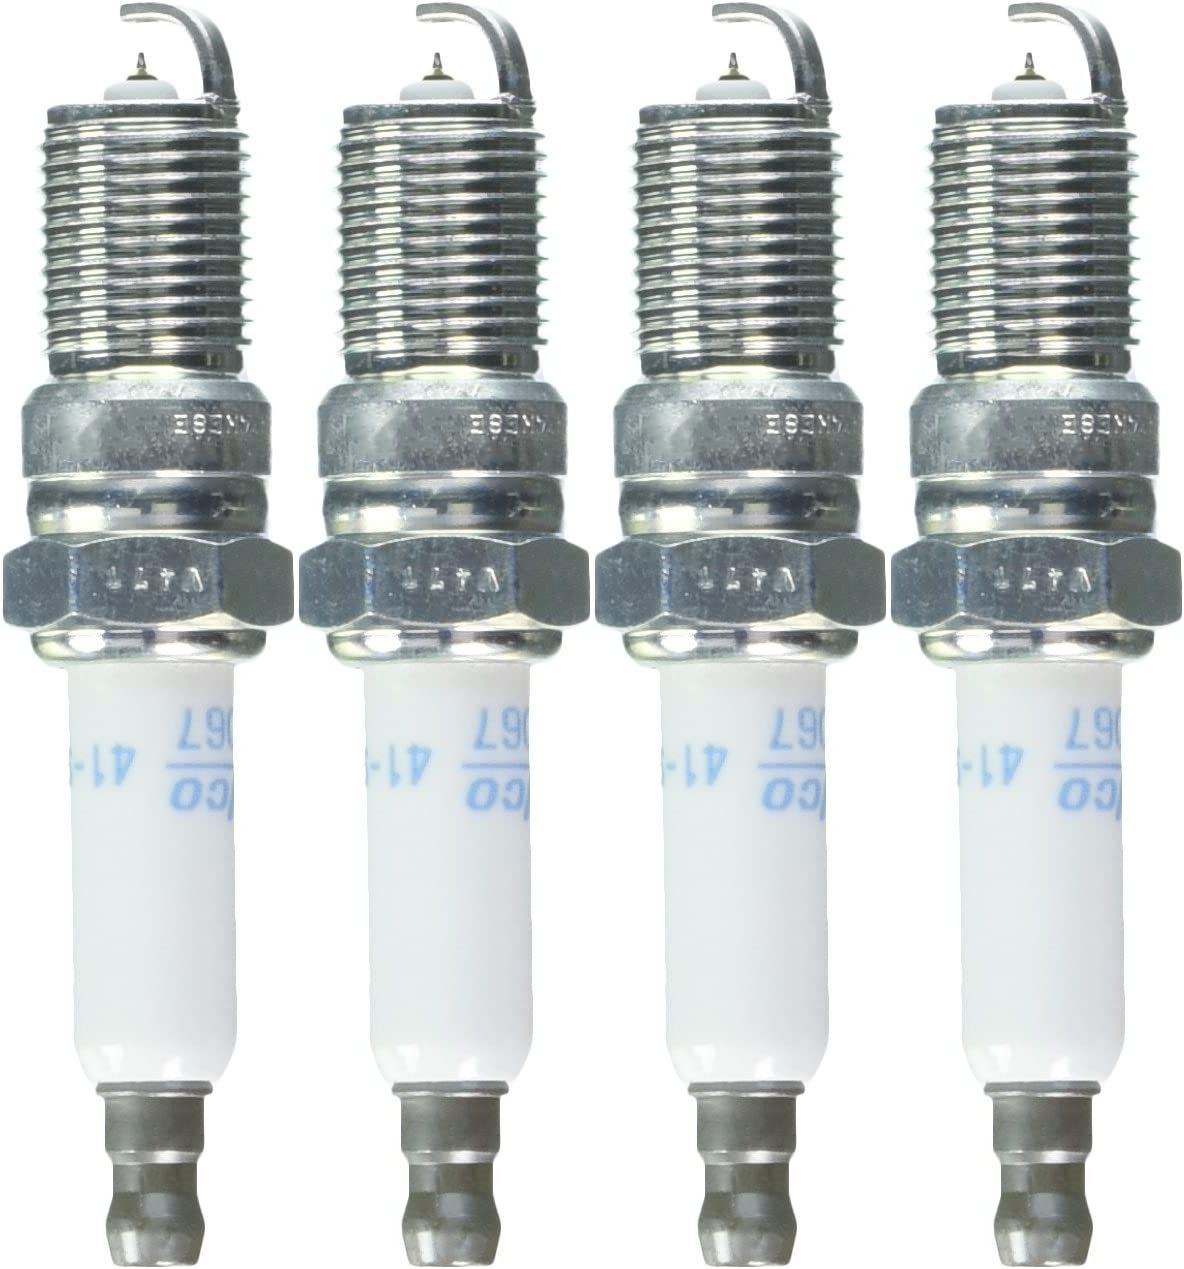 4-Count ACDelco Professional Iridium Spark Plugs (41-993) $7.50 + Free Shipping w/ Prime or on $25+